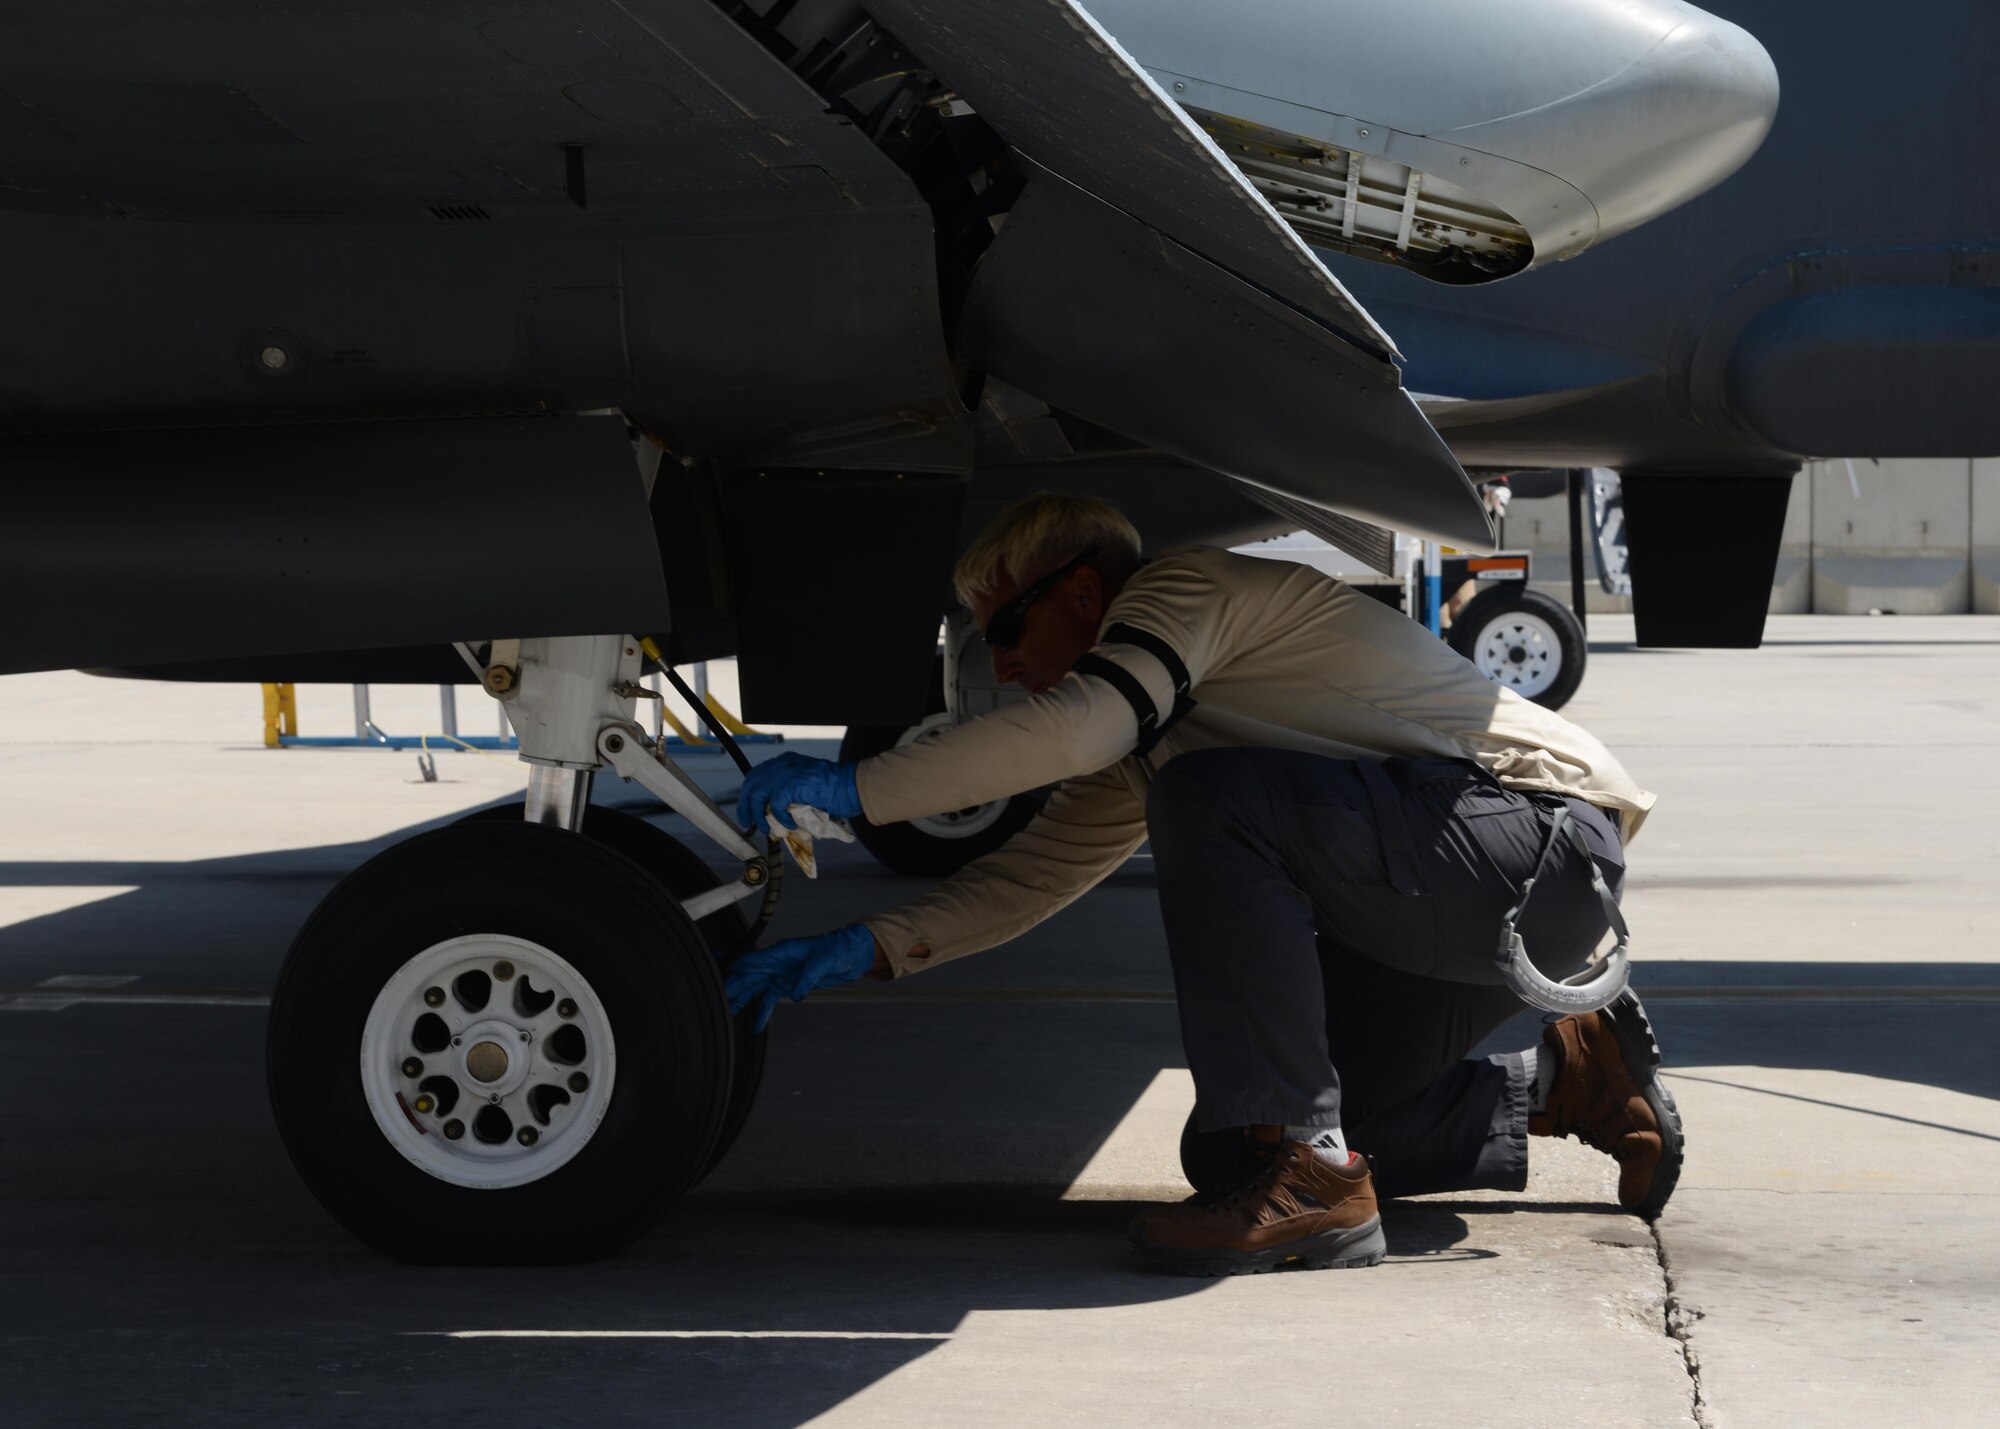 Jeffery Hinchey, 455th Expeditionary Aircraft Maintenance Squadron aircraft mechanic, checks the tires of an MC-12W June 26, 2015, at Bagram, Airfield, Afghanistan. Hinchey is part of the Project Liberty team that is deployed here in support of NATO’s Resolute Support mission. (U.S. Air Force photo by Senior Airman Cierra Presentado/Released)